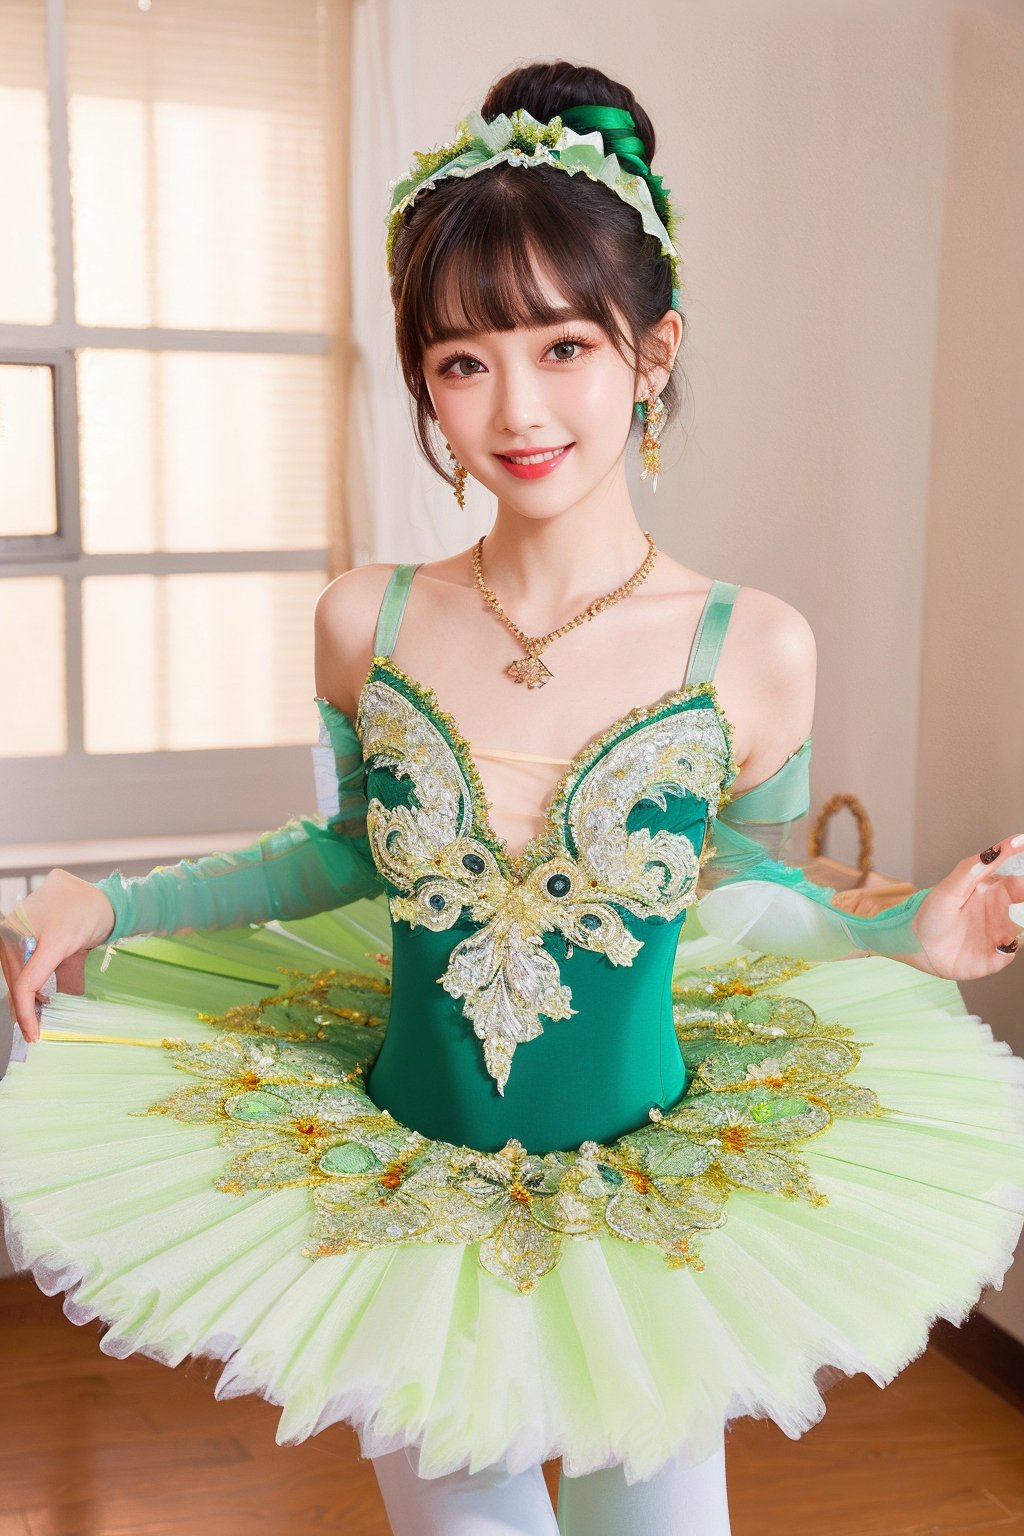 HDR,UHD,8K,best quality,masterpiece,Highly detailed,Studio lighting,ultra-fine painting,sharp focus,physically-based rendering,extreme detail description,Professional,masterpiece, best quality,delicate, beautiful,(1girl),(green Ballet_tutu:1.5),(jewelry:1.5),lace,(looking_at_viewer:1.2), realistic,(blunt bangs:1.2),(hair bun),(standing:1),(hair ornament:1.2), (jewelry necklace:1),dance classroom background,(Half-length photo:1),(smile:1),(white lace stockings:1),